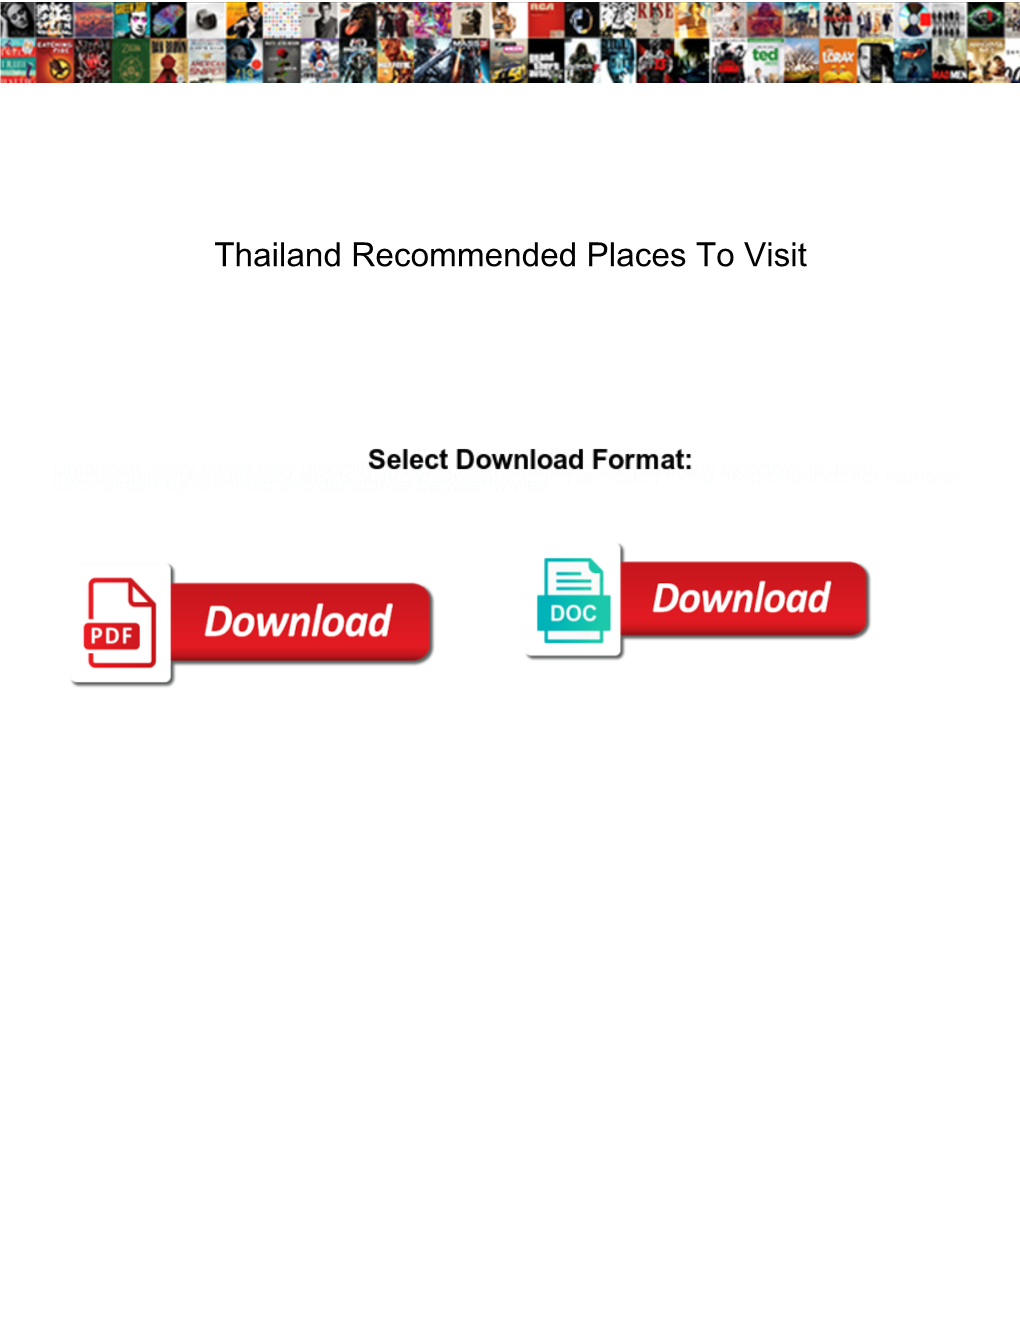 Thailand Recommended Places to Visit